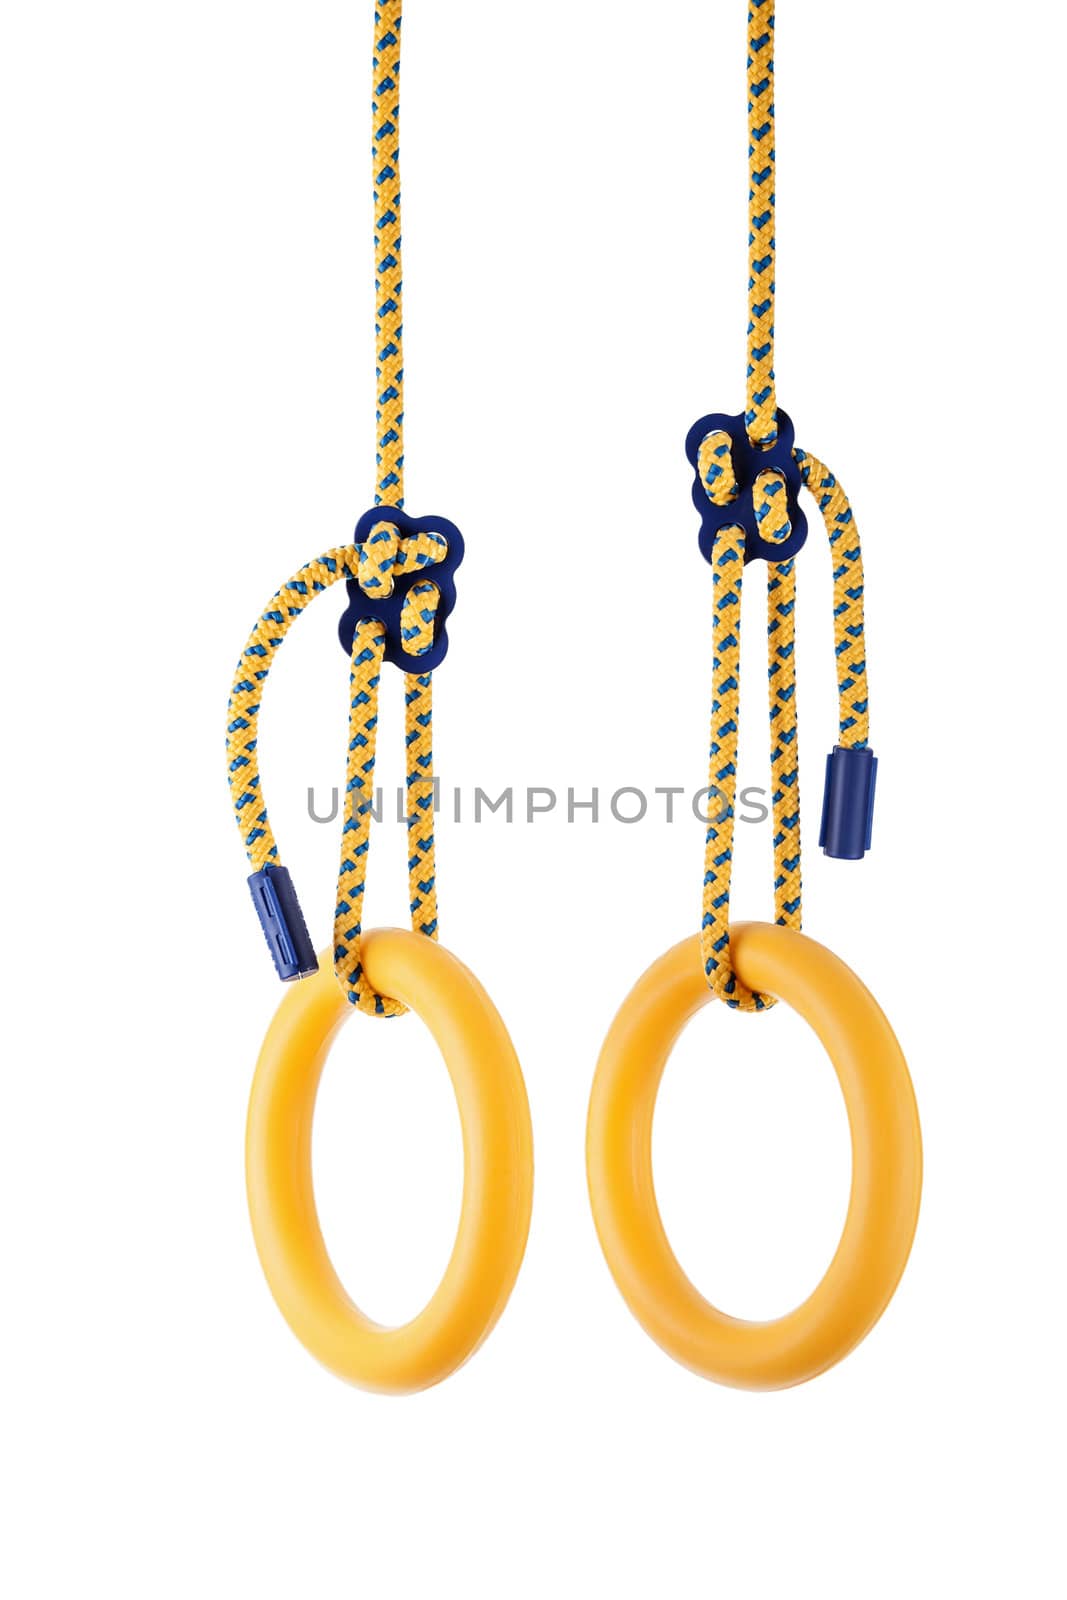 Gymnastic rings by ia_64